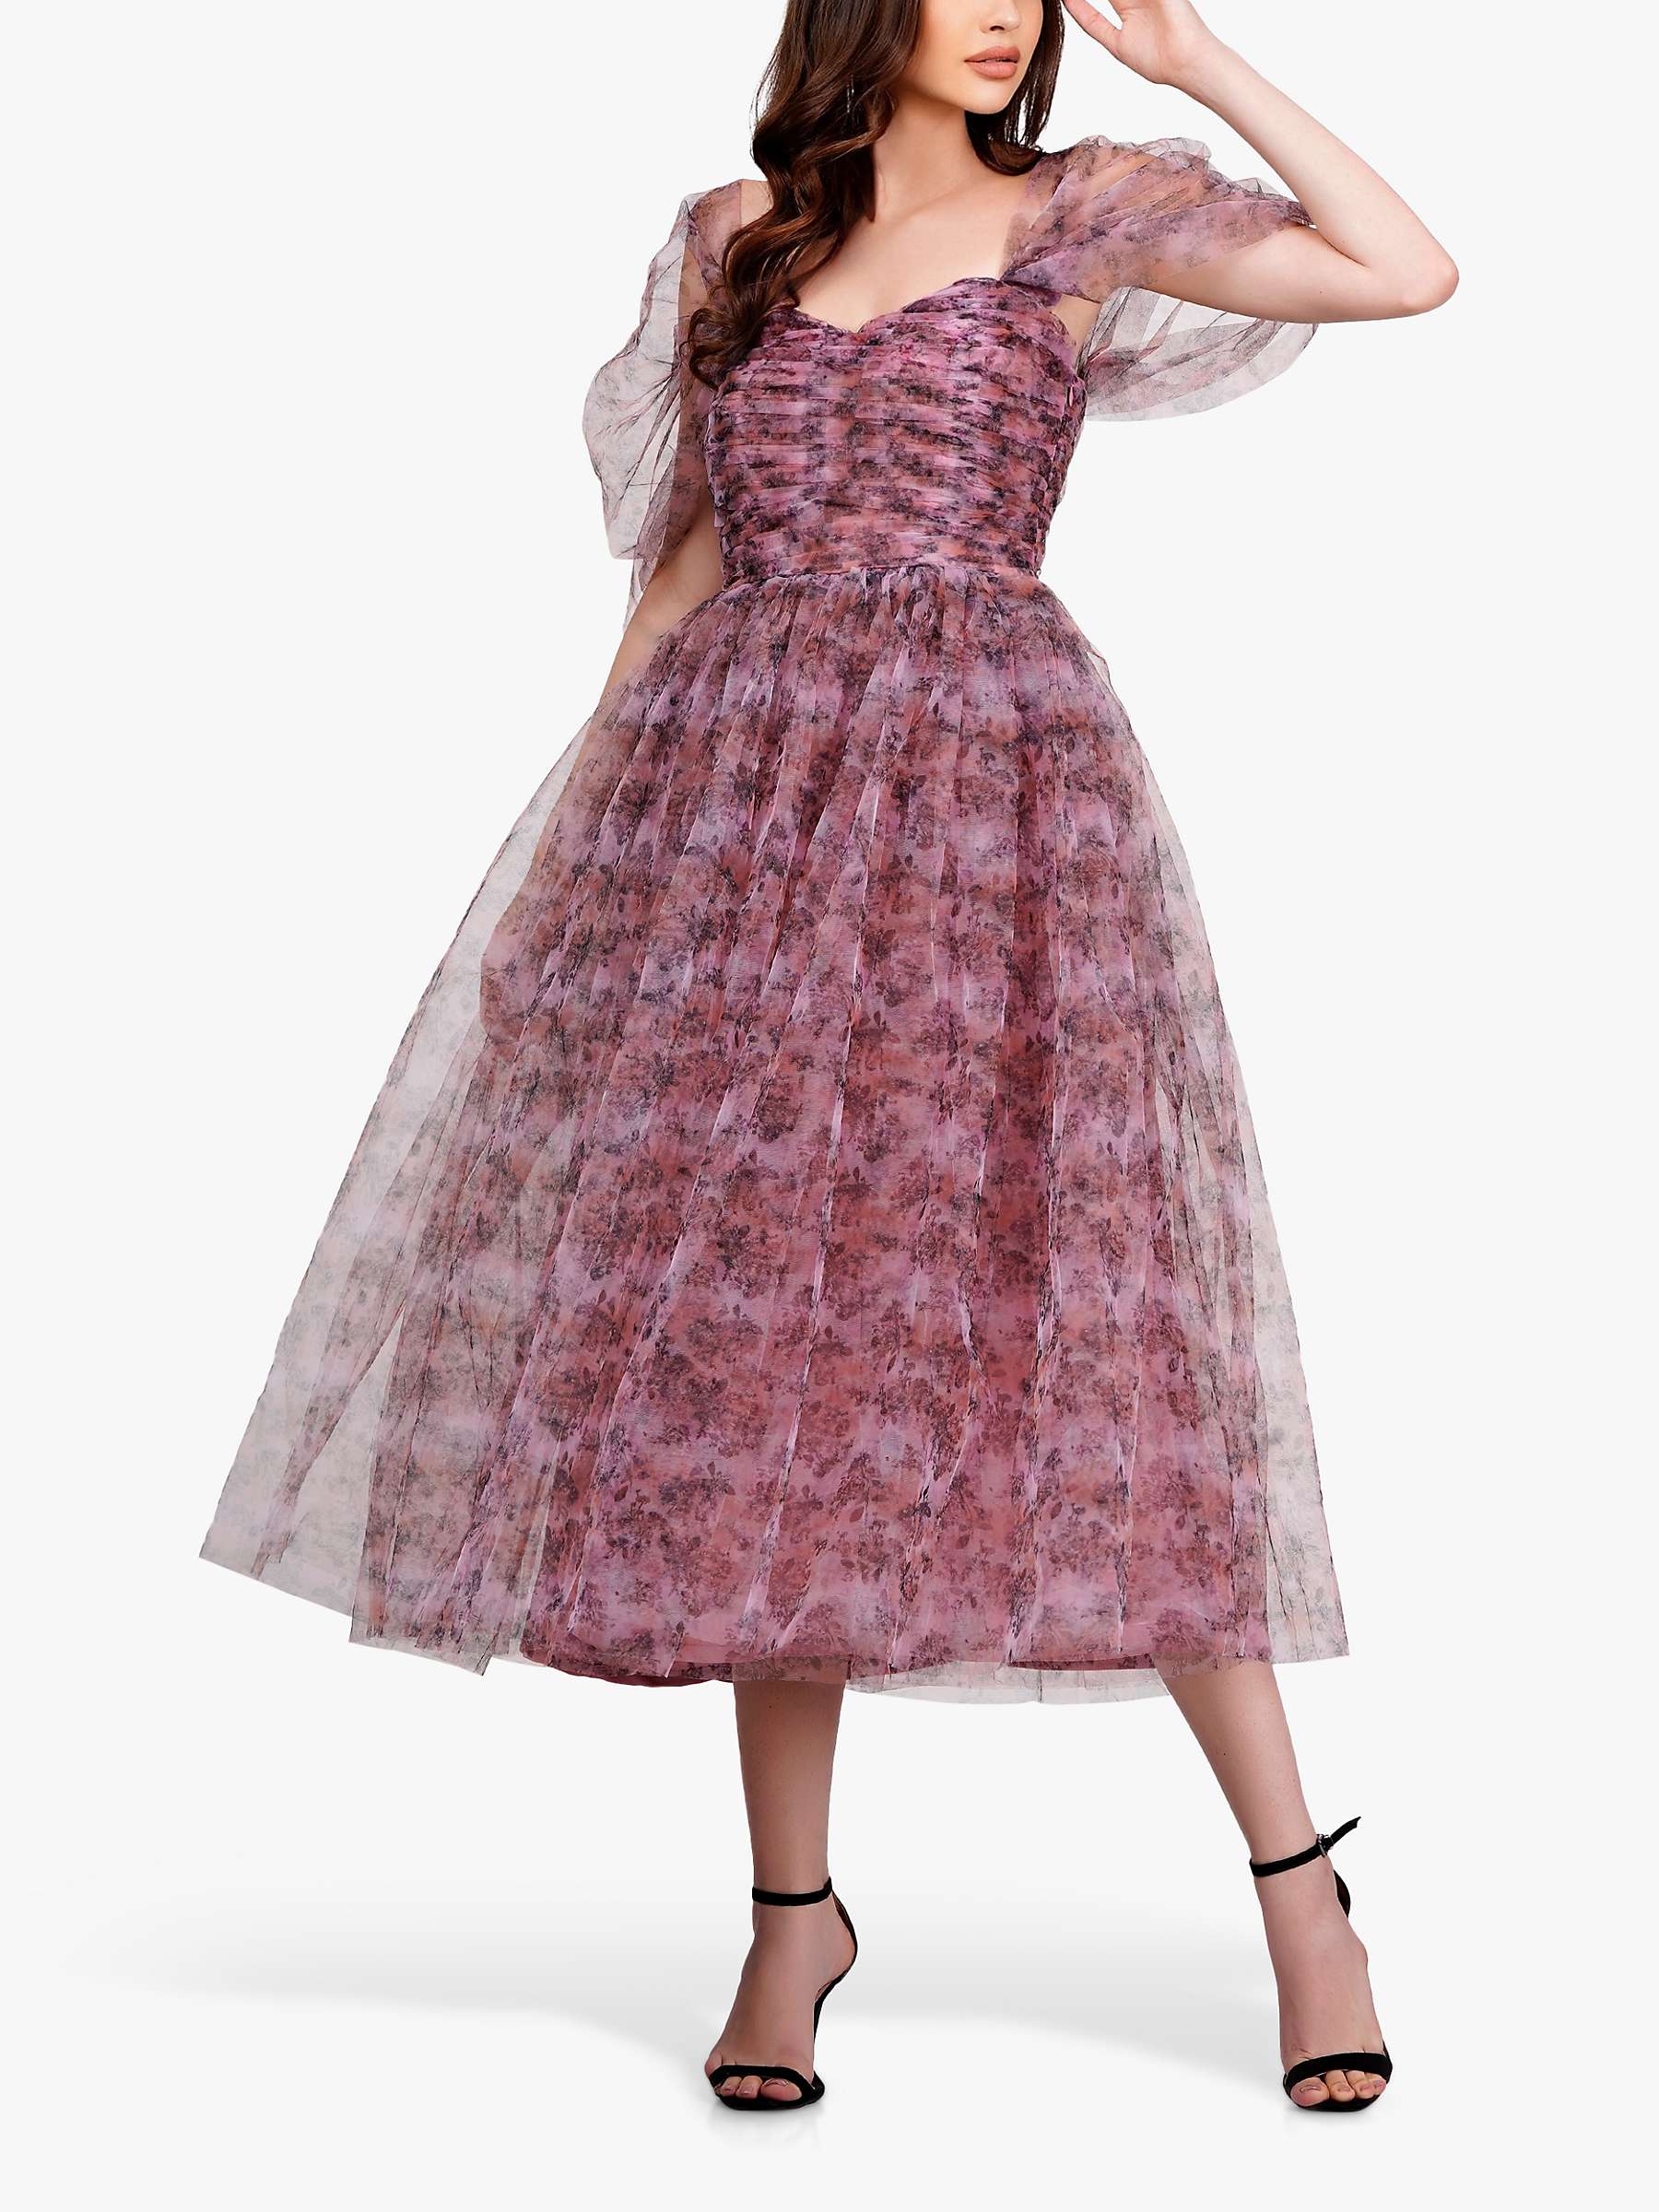 Buy Lace & Beads Melbourne Tulle Midi Dress, Floral Pink Online at johnlewis.com